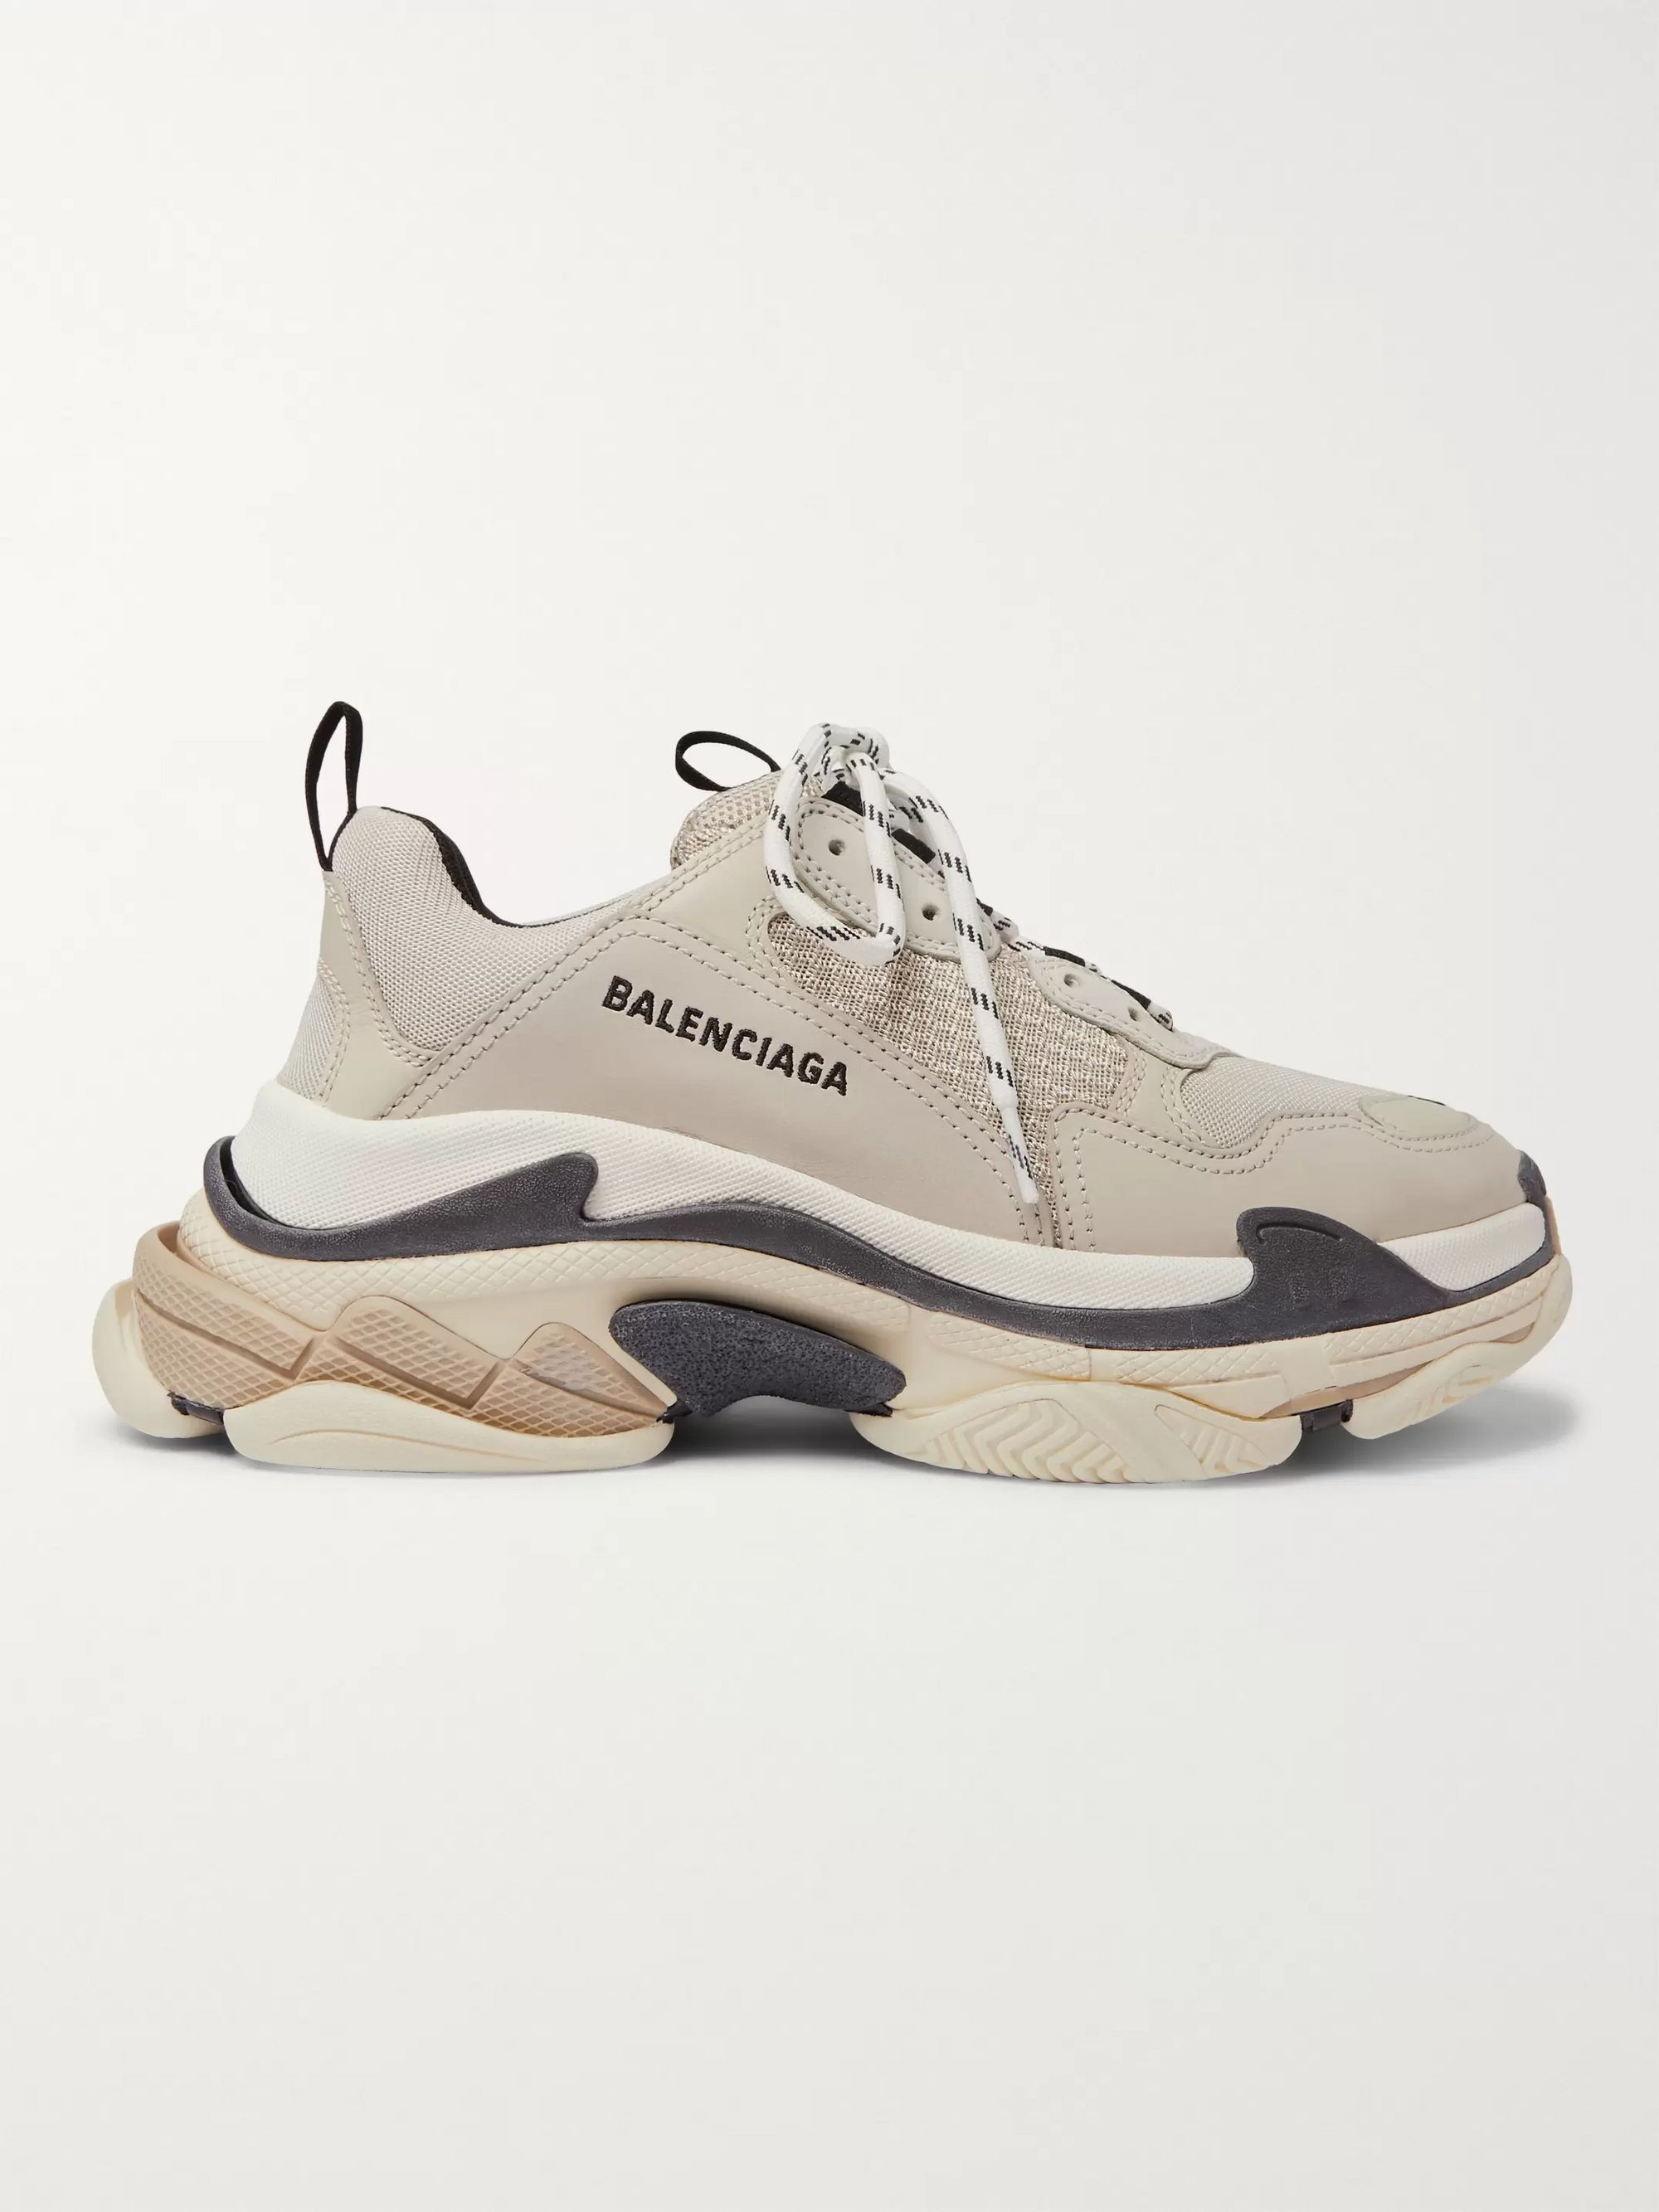 Click here to buy Balenciaga Triple S trainers at Pinterest